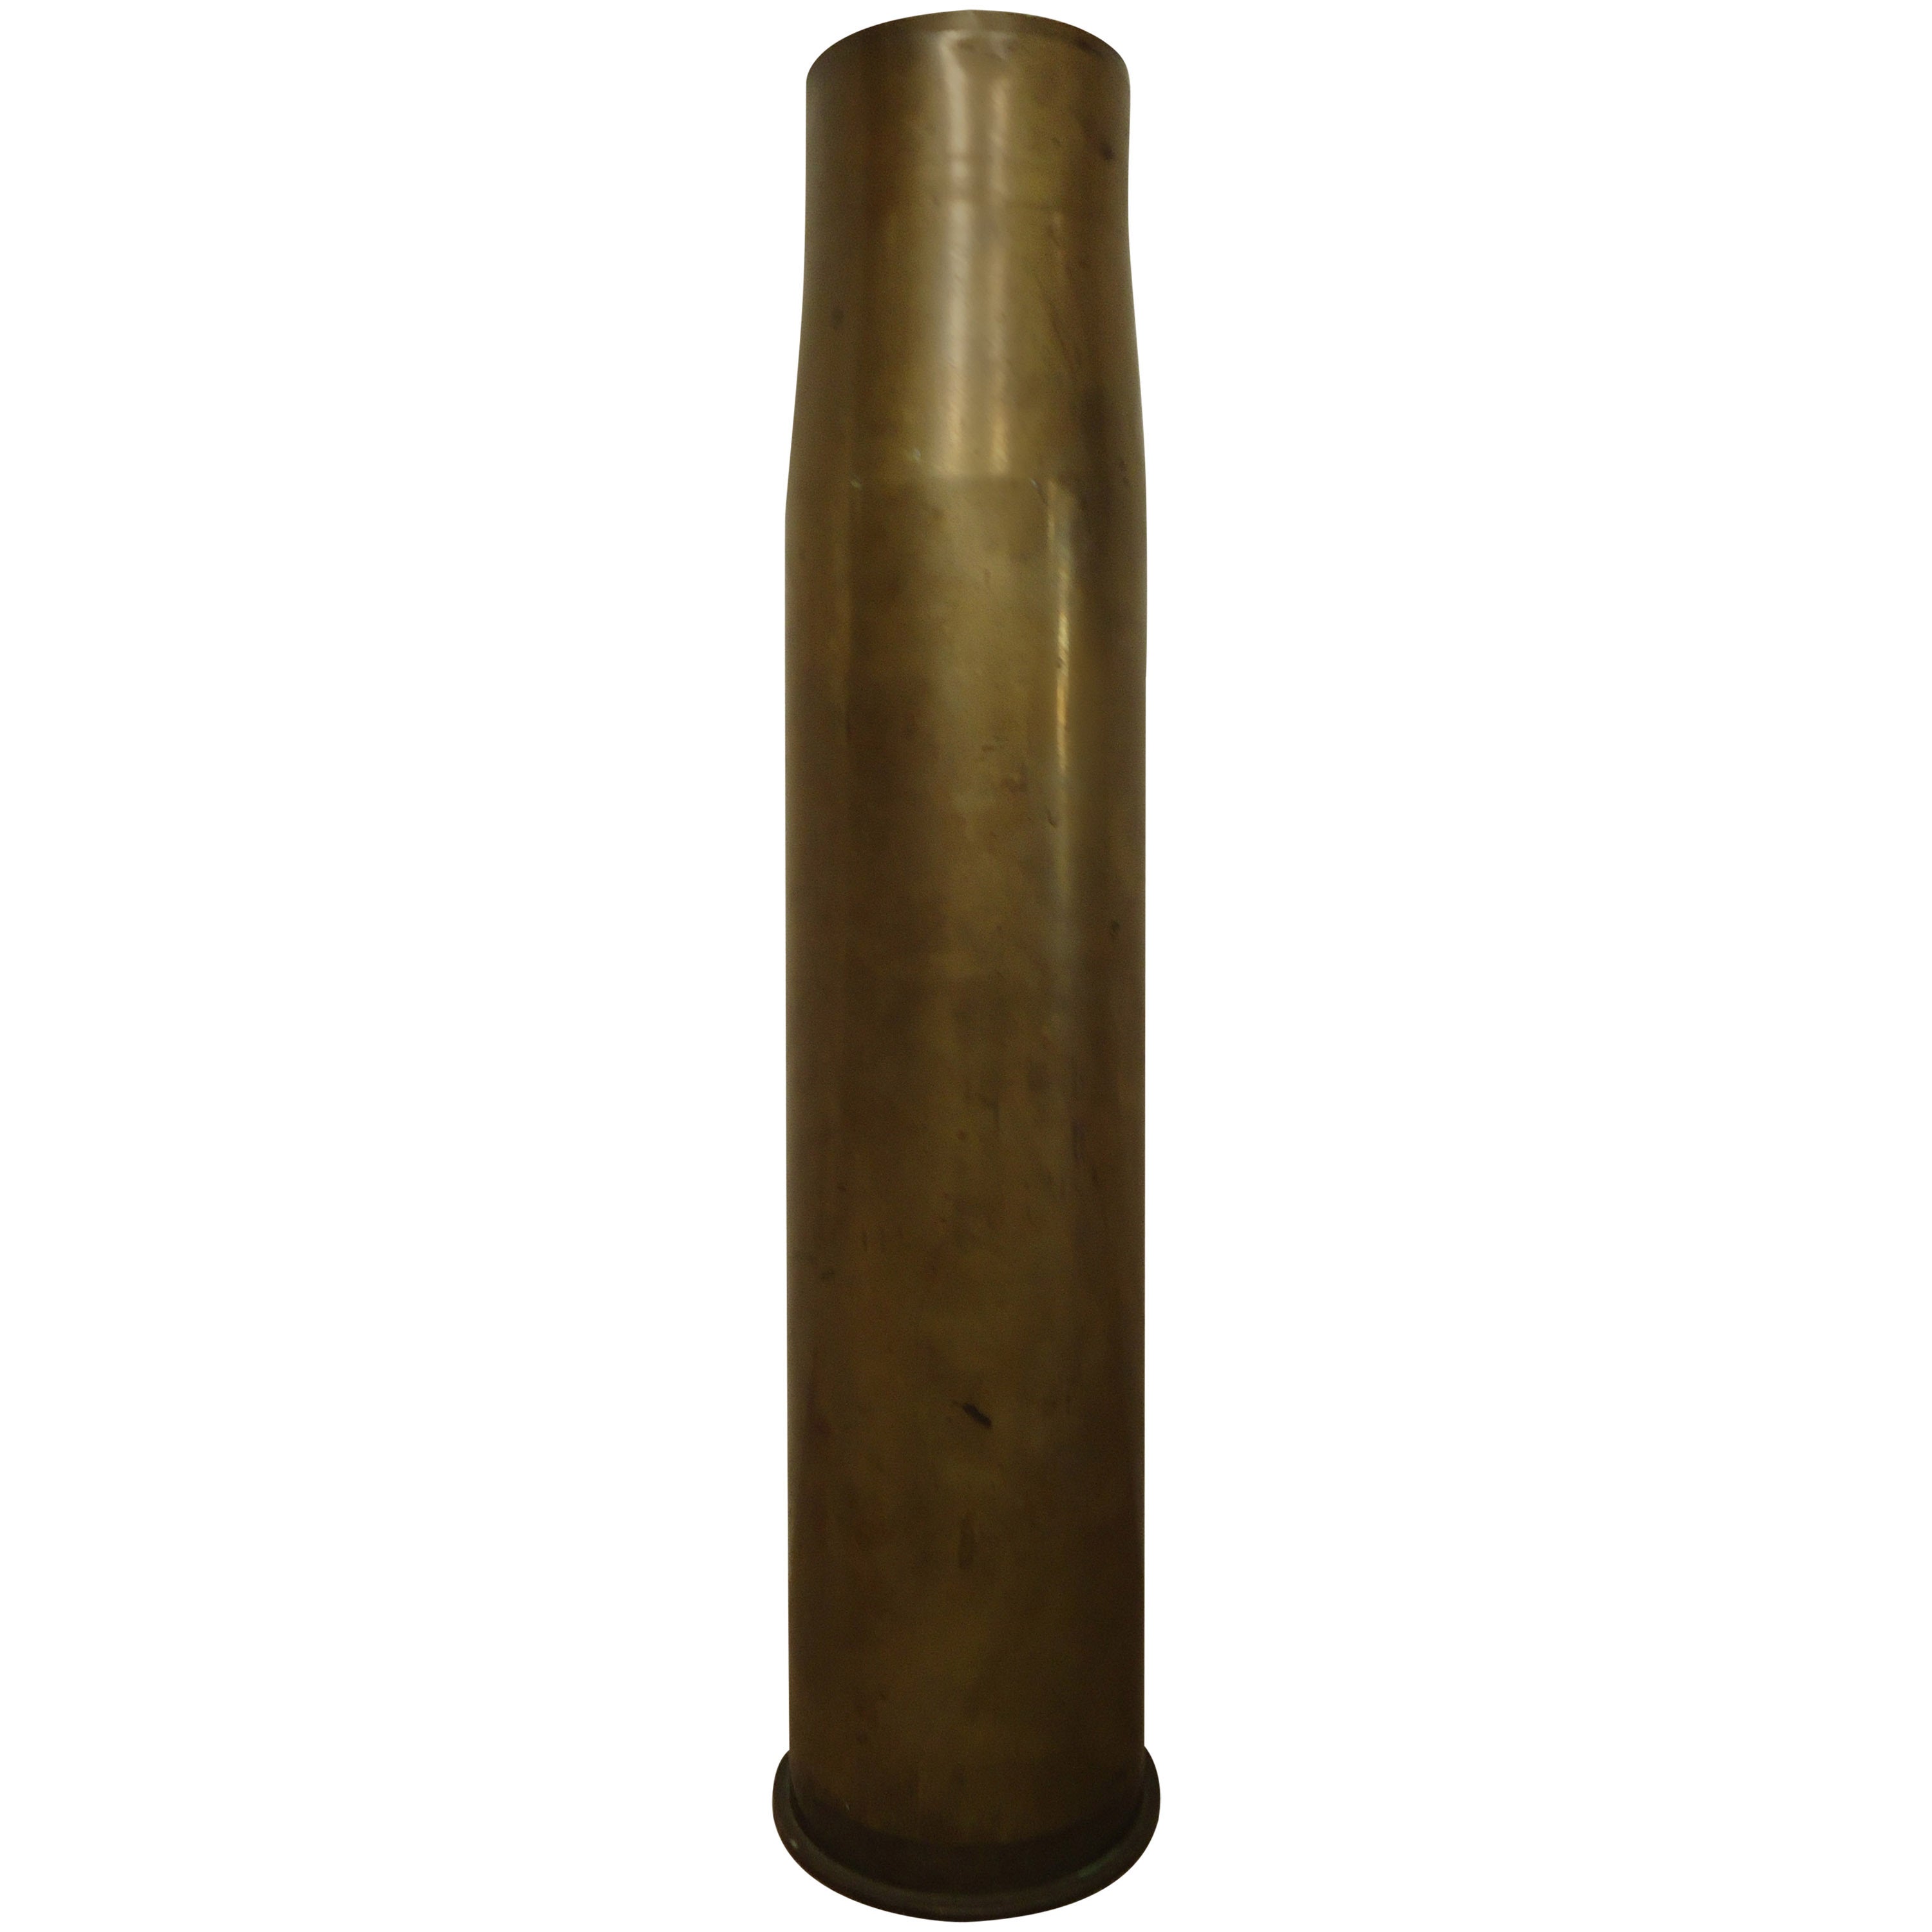 Brass Bullet Casing Labeled, "105-MM - XM150"